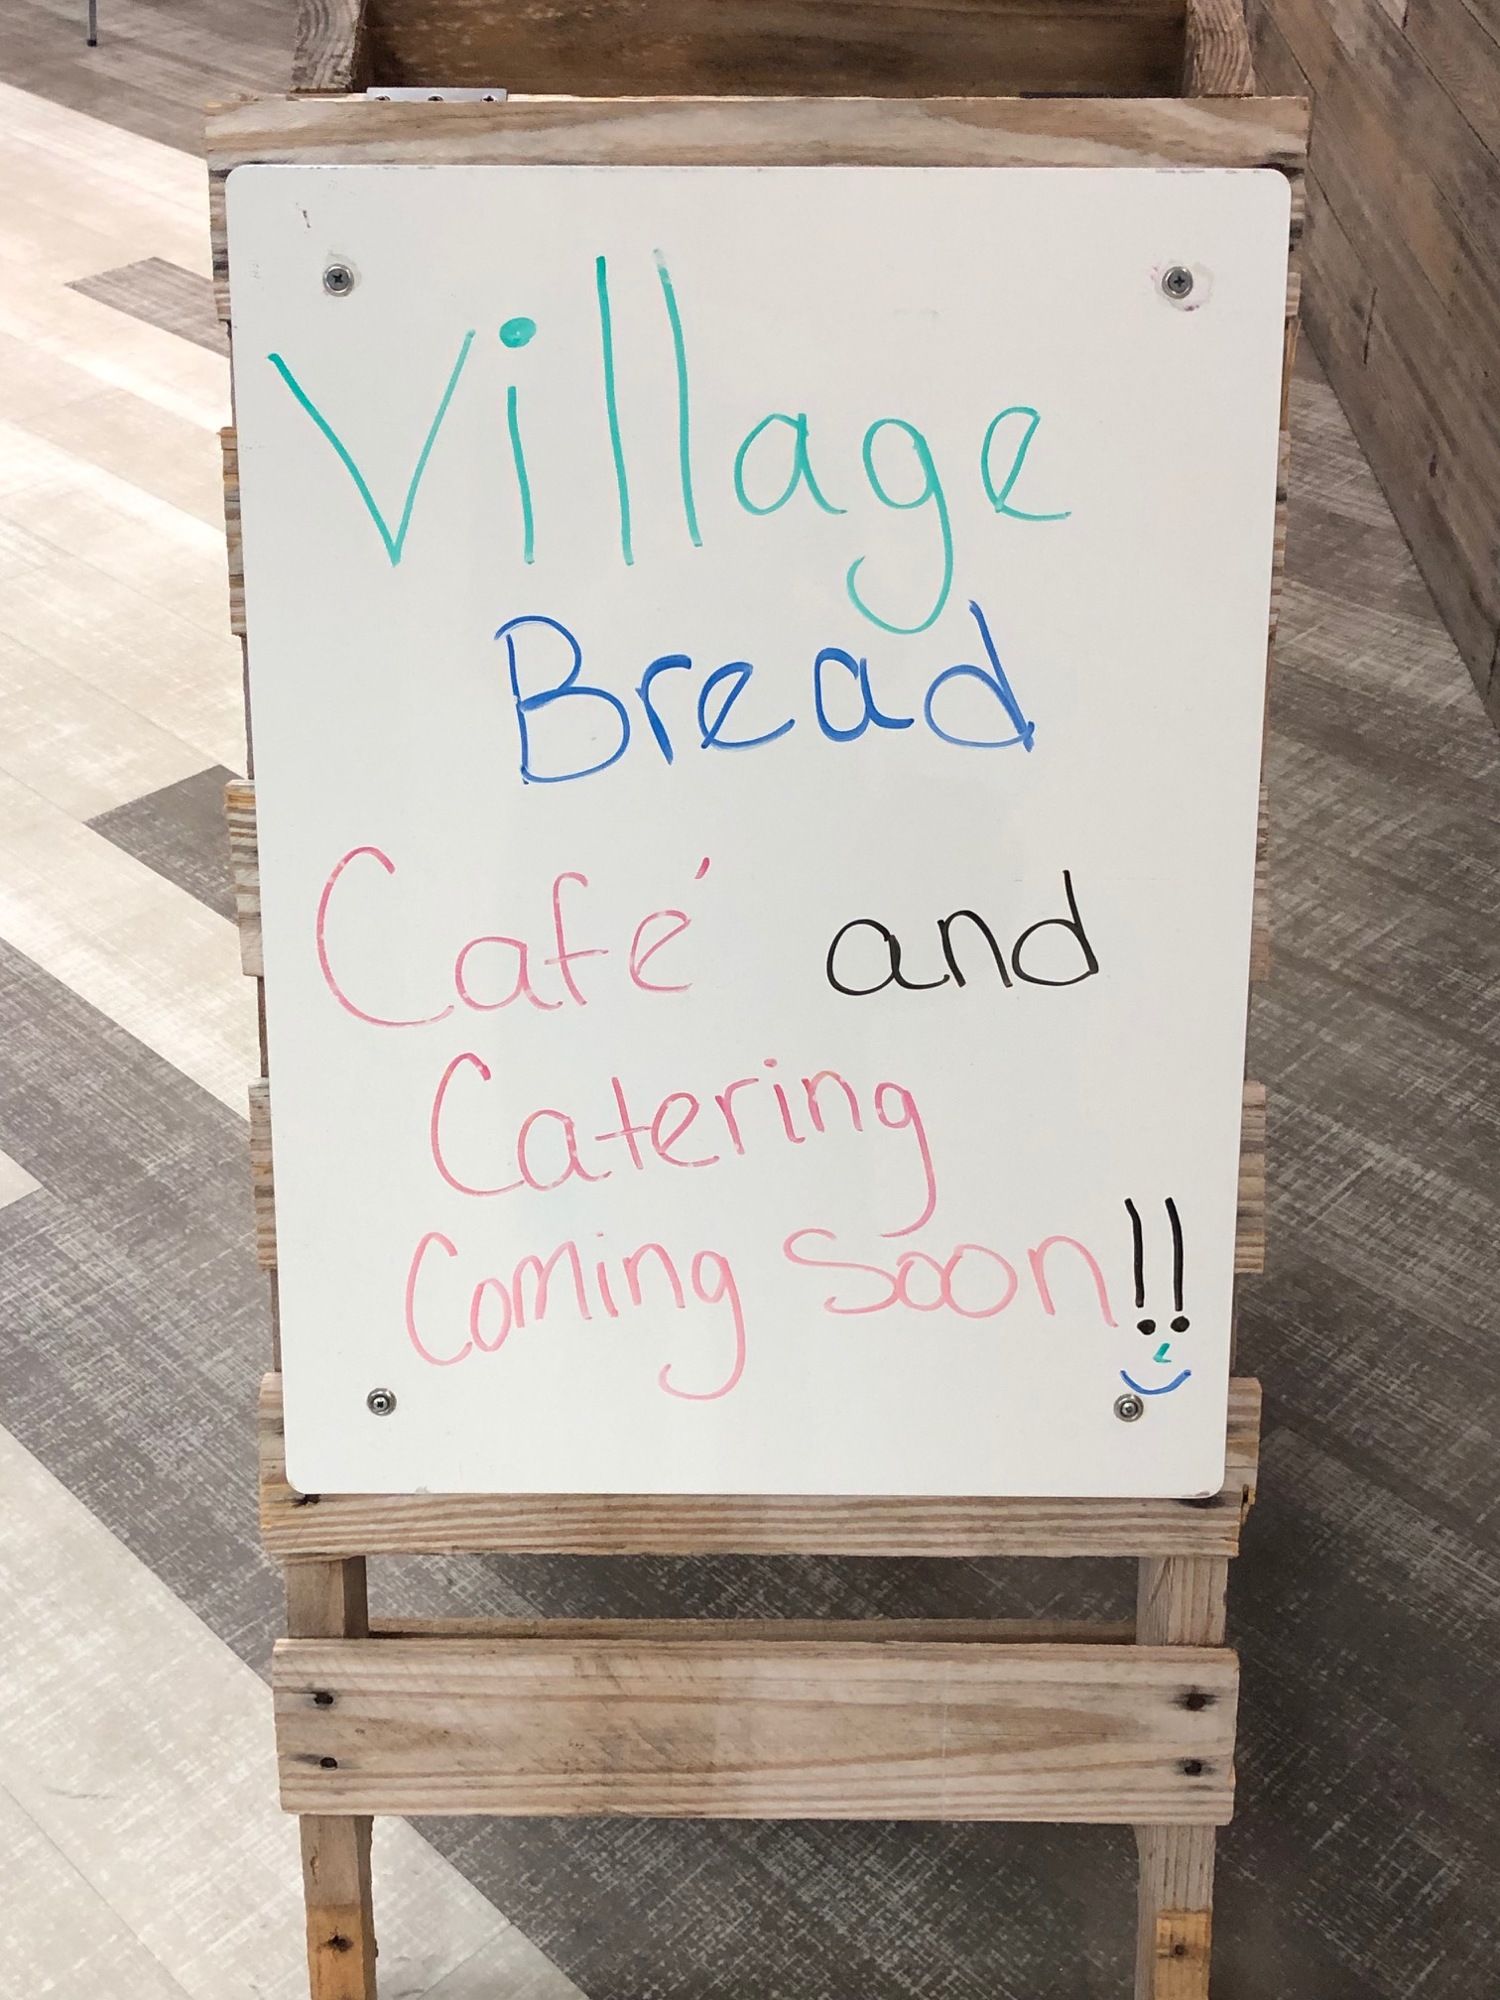 Village Bread Café is coming to the riverfront ground level of Riverplace Tower on the Downtown Southbank.